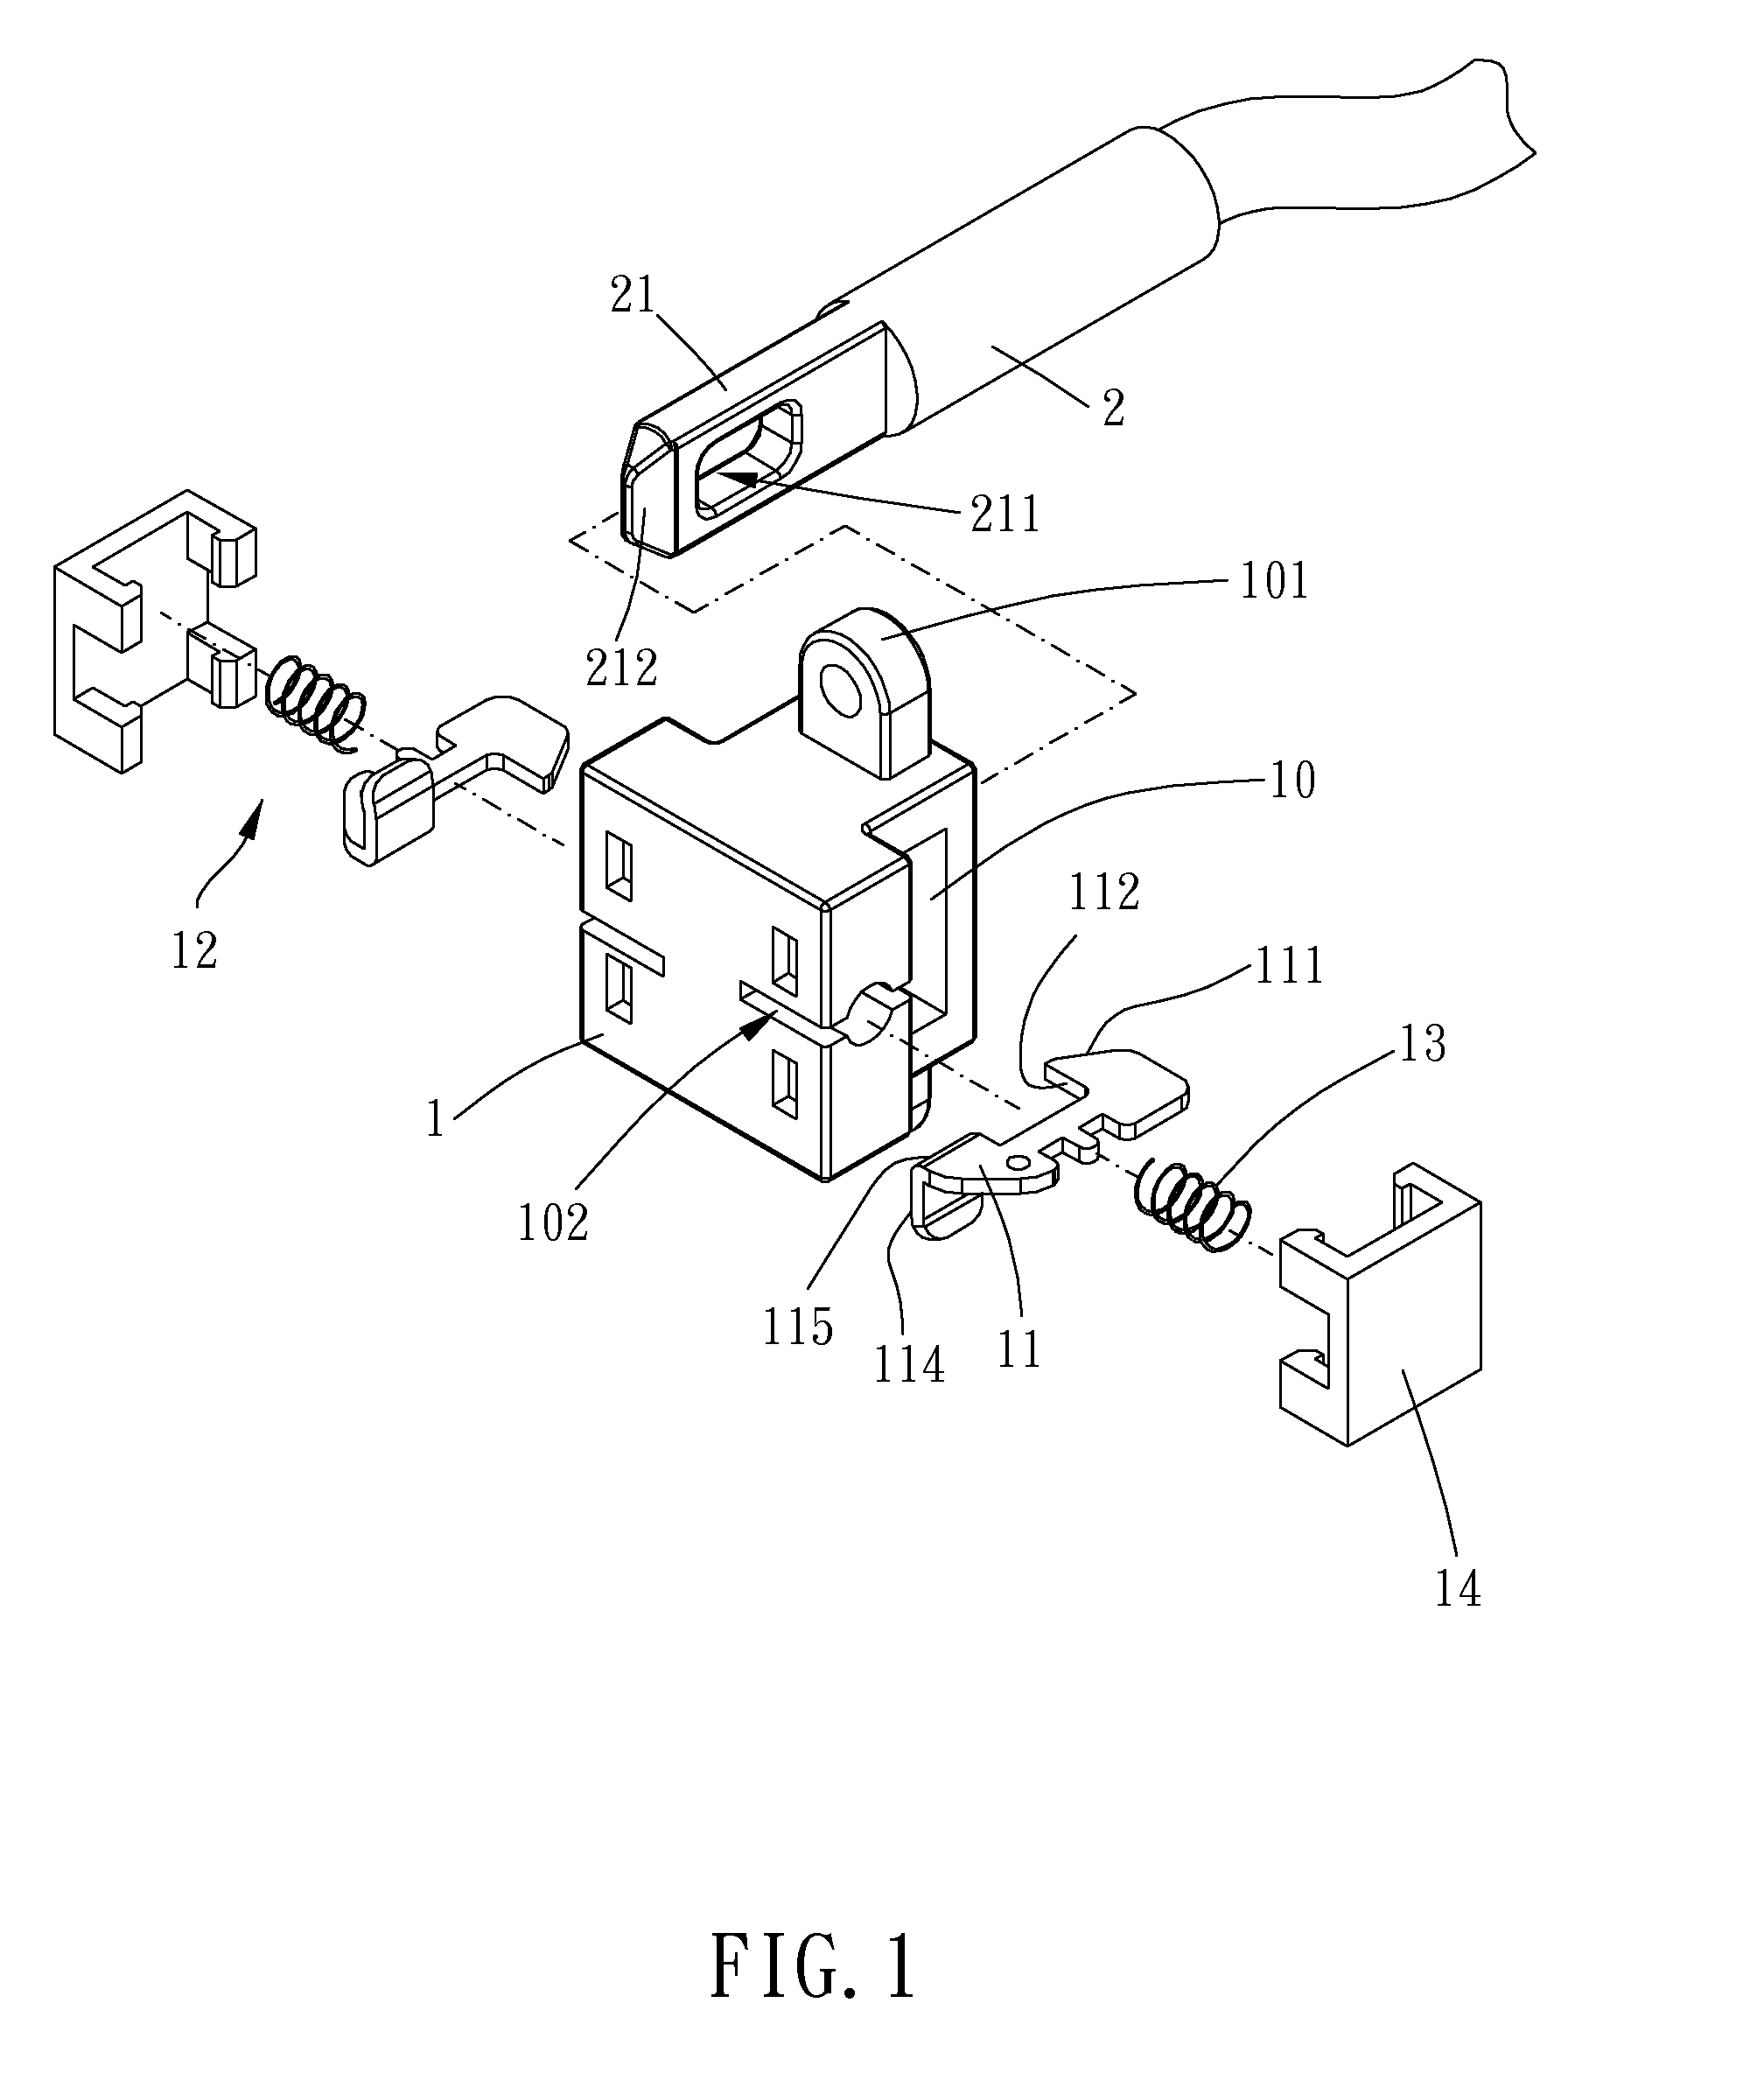 Engagement structure for a cable head